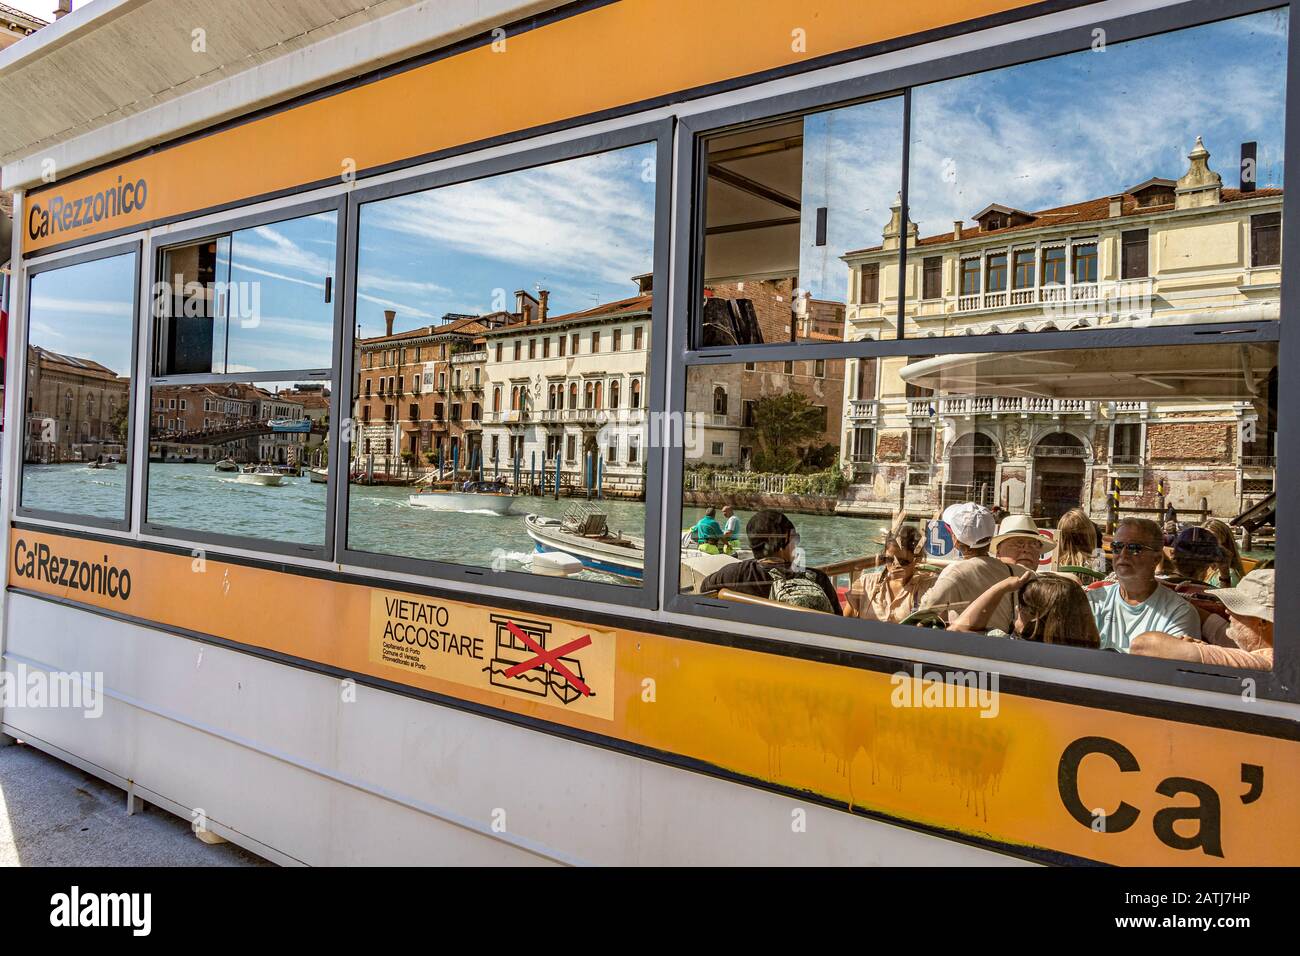 Vaporetto or water bus passengers reflected in the glass windows at Ca' Rezzonico Vaporetto stop on The Grand Canal ,Venice,Italy Stock Photo